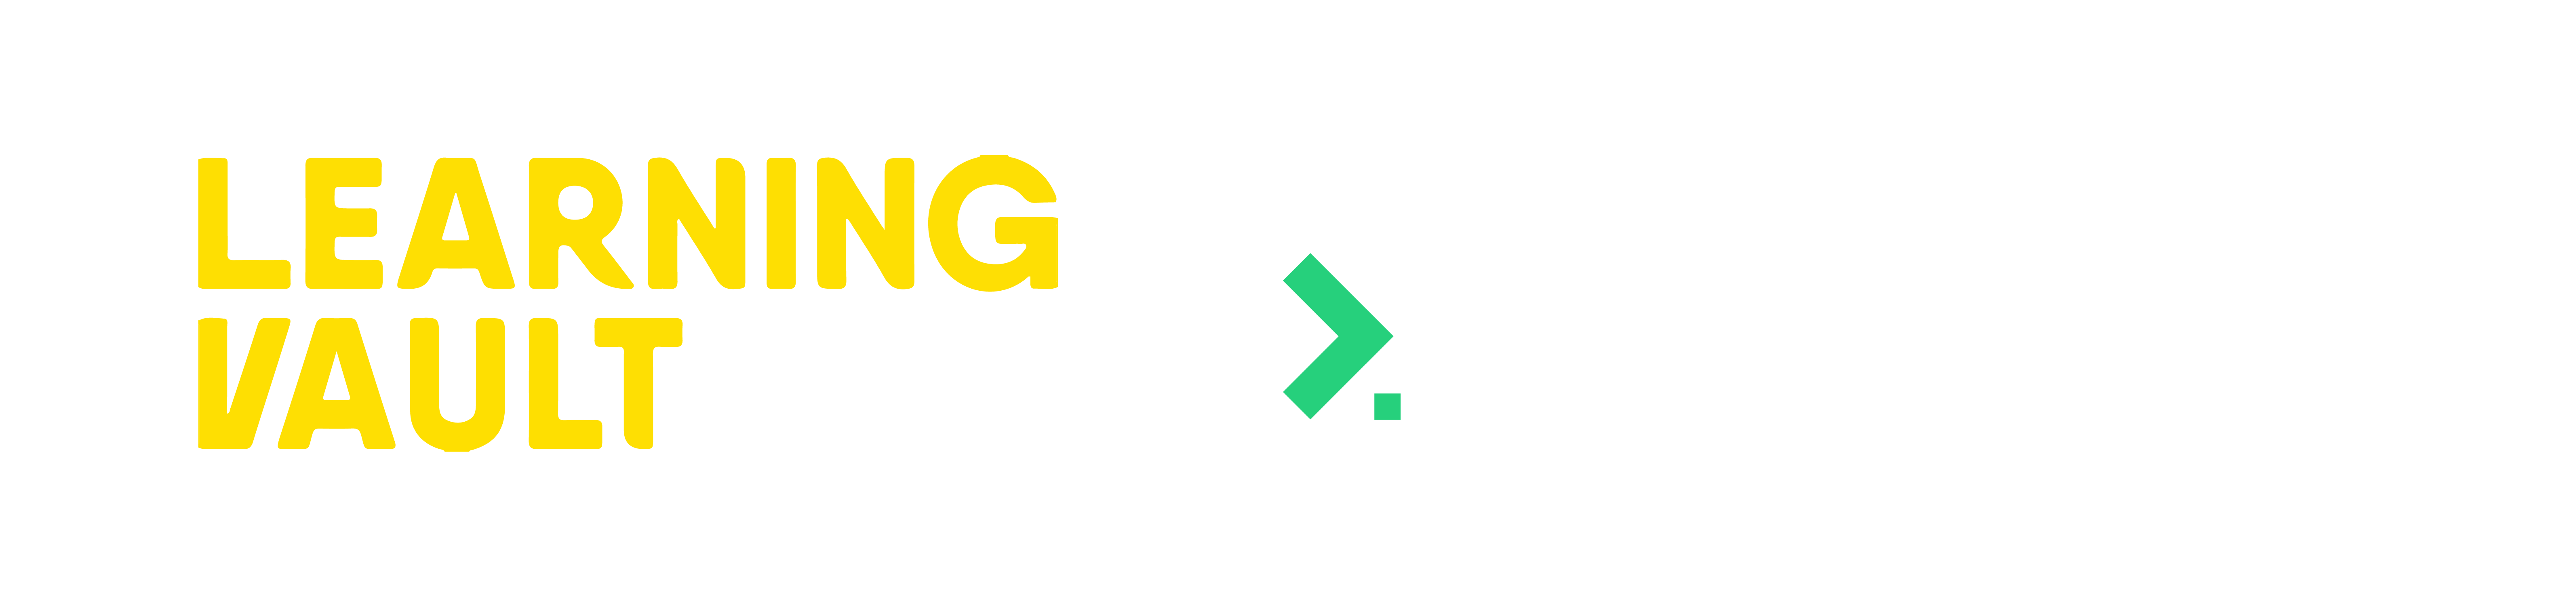 RDY Backed by Learning Vault Reverse